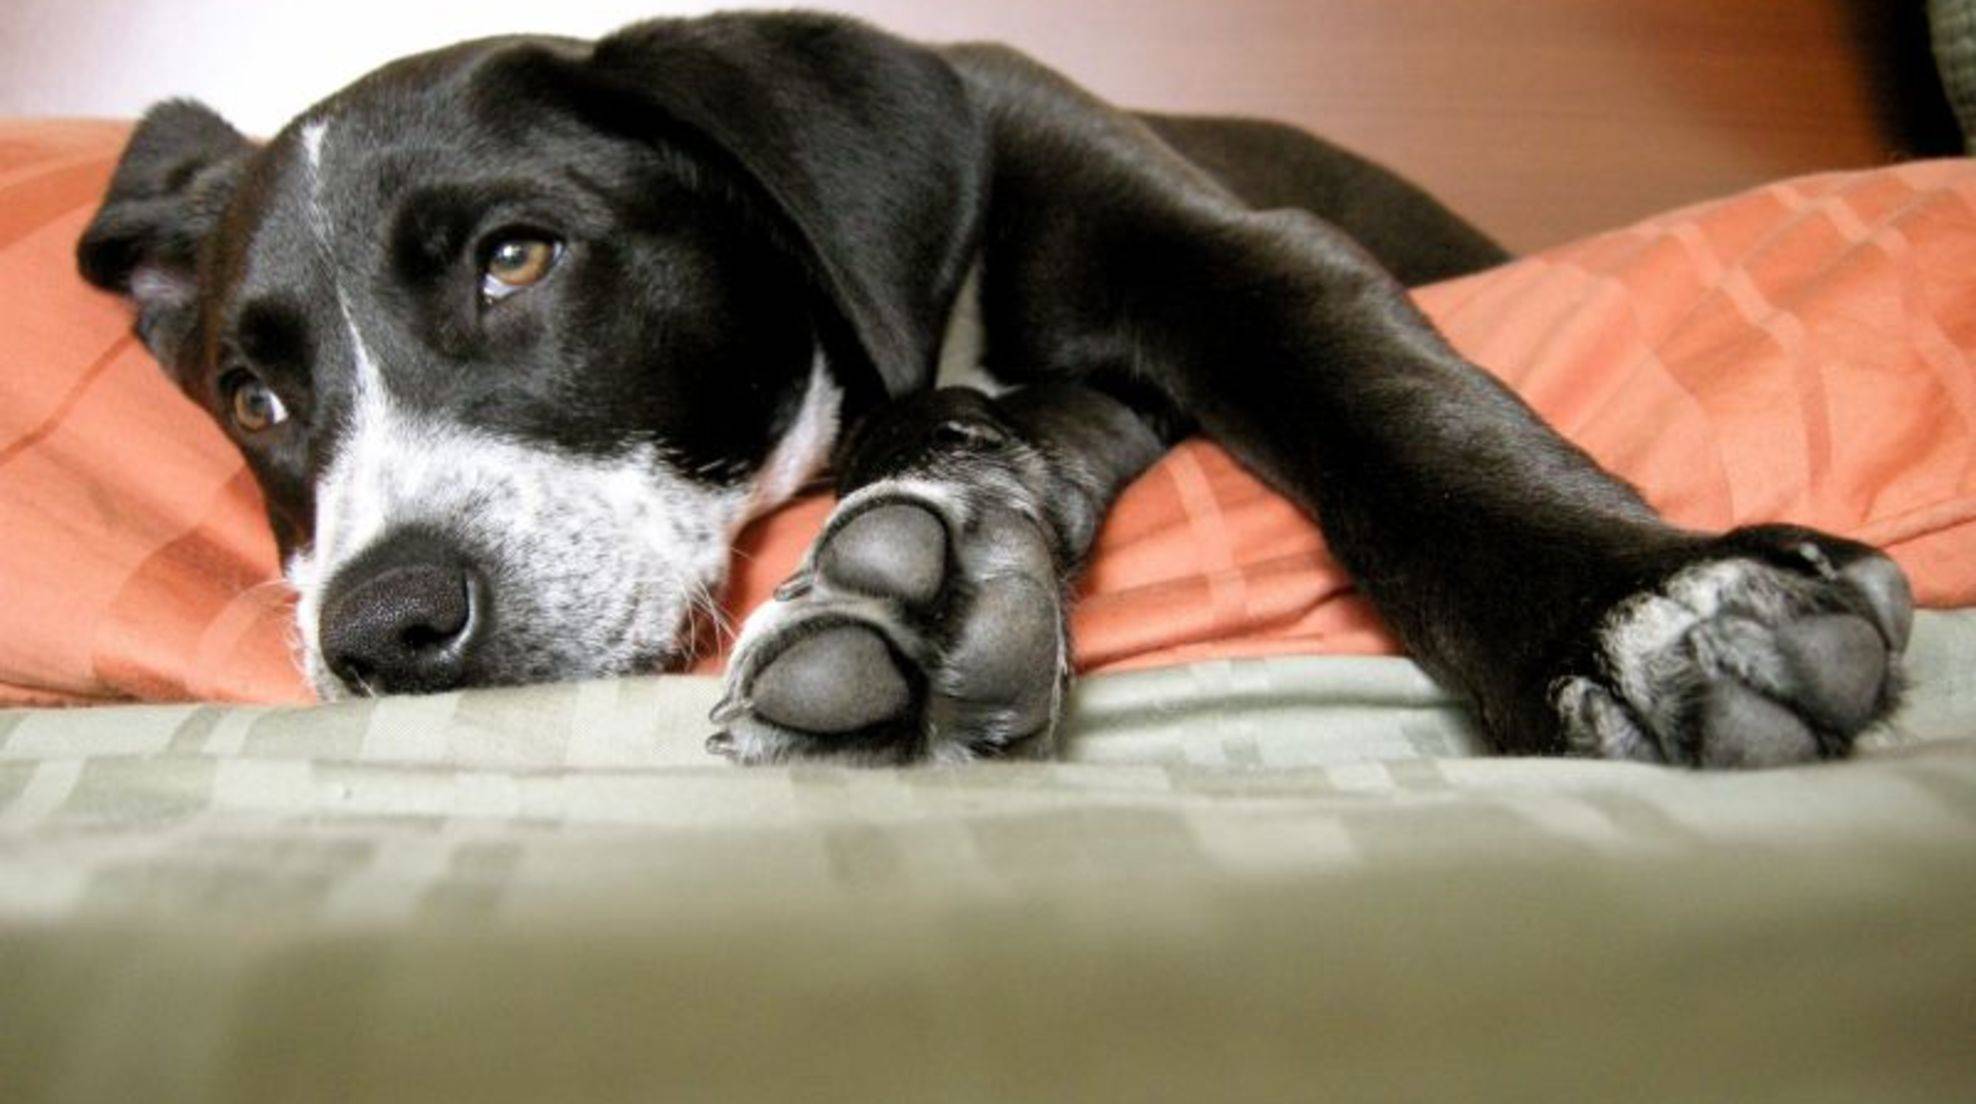 Causes of osteoarthritis in dogs